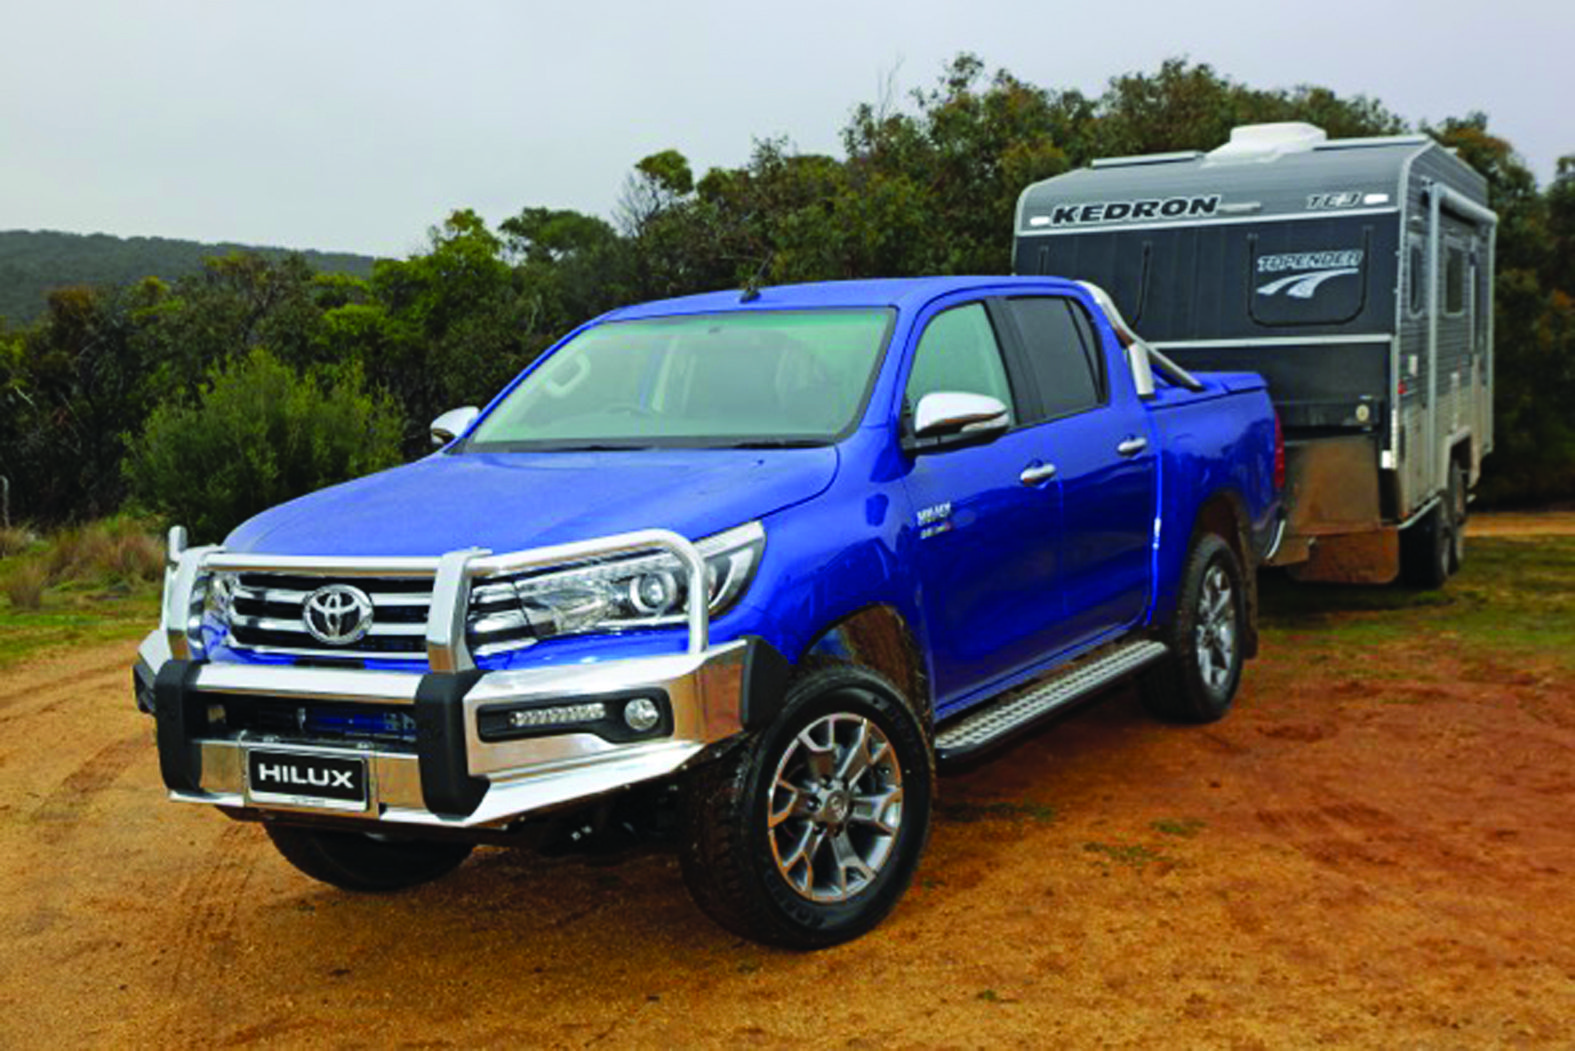 The latest HiLux made short work of towing a Kedron Caravan off-road.